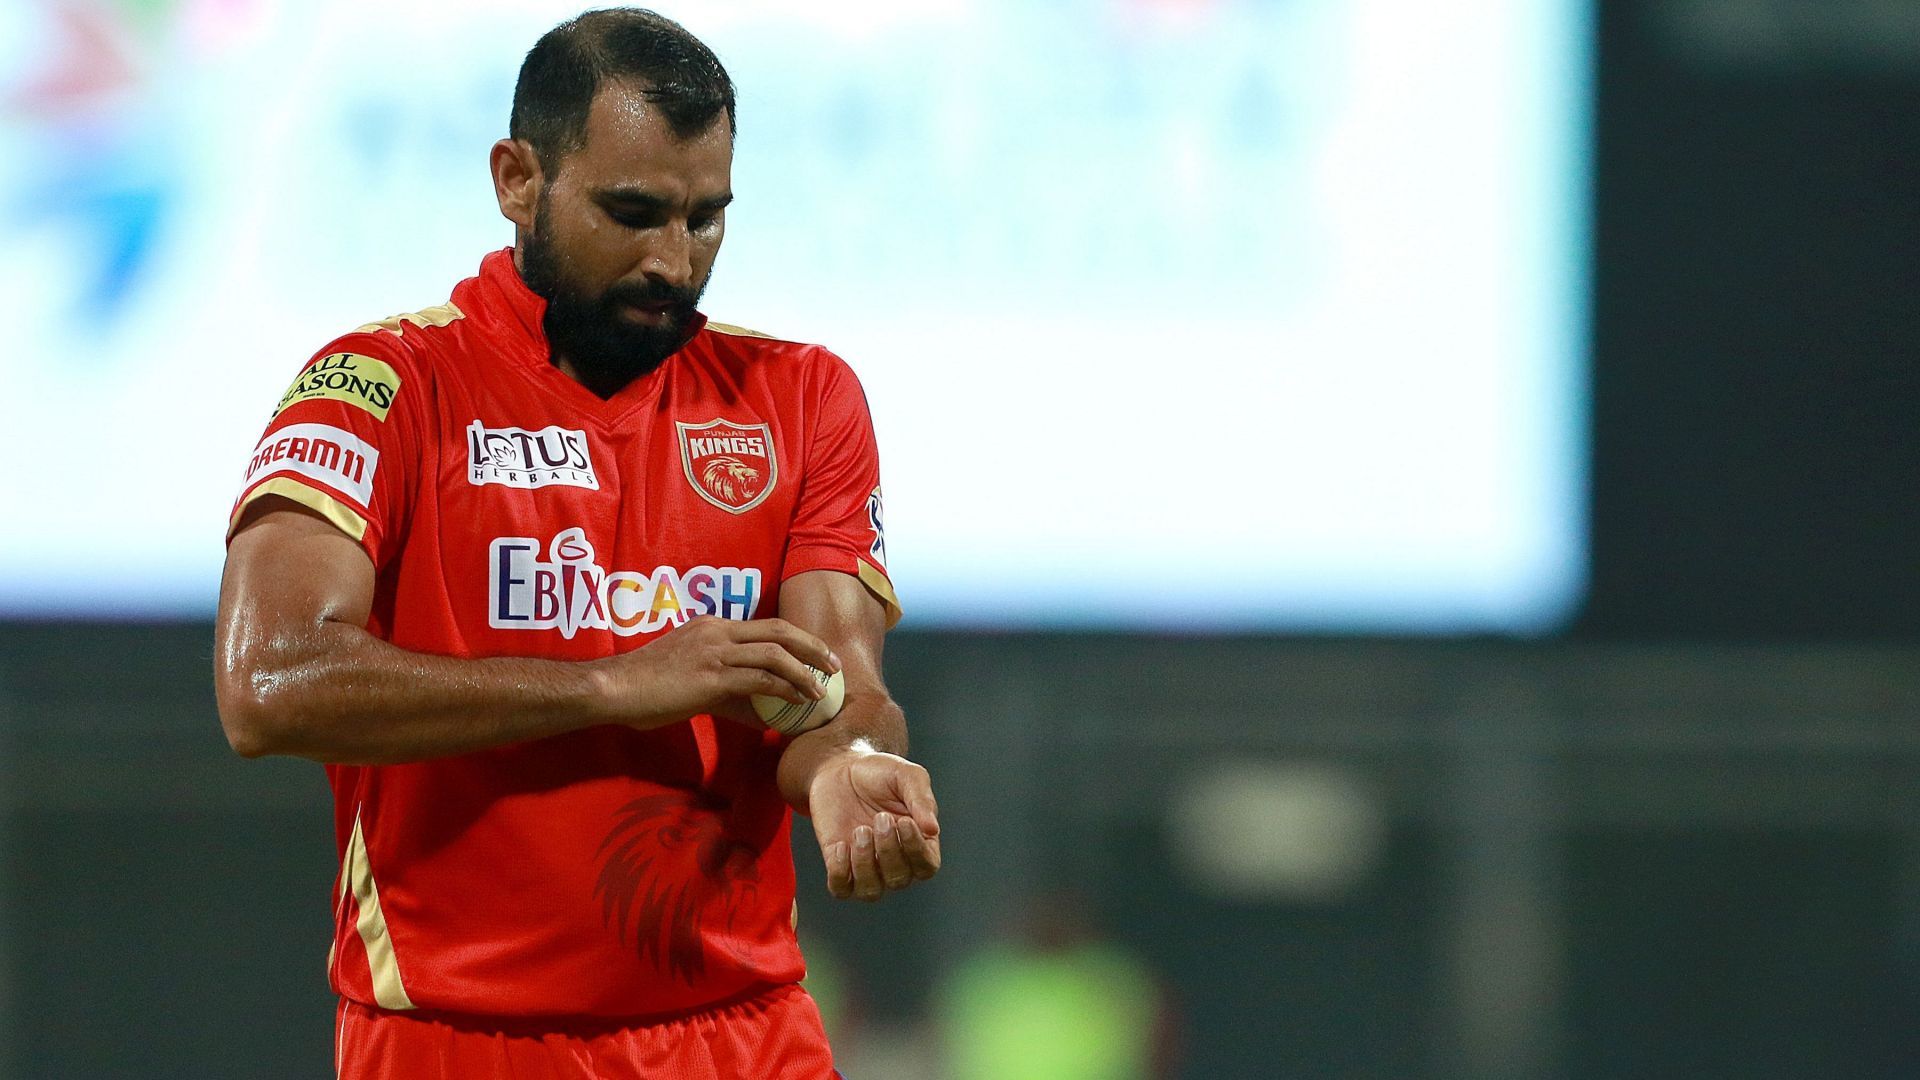 Mohammed Shami was part of Punjab Kings in IPL 2021 (Credit: BCCI/IPL)